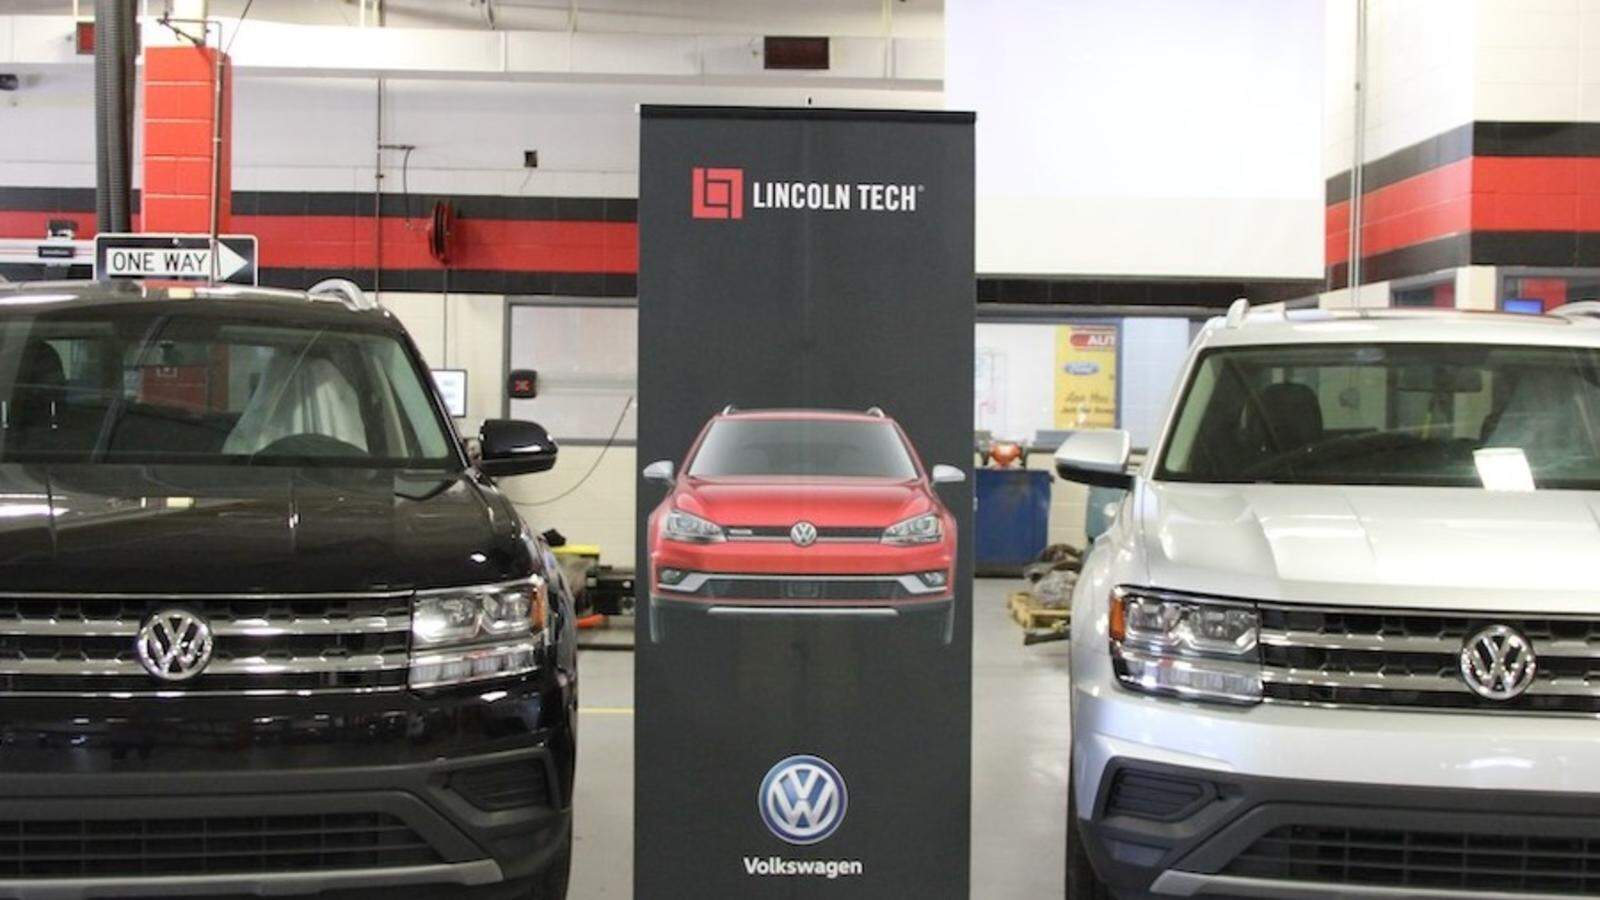 Two 2020 VW Atlas SUVs. Students in Lincoln Tech’s Mahwah NJ automotive training program with VW specialty